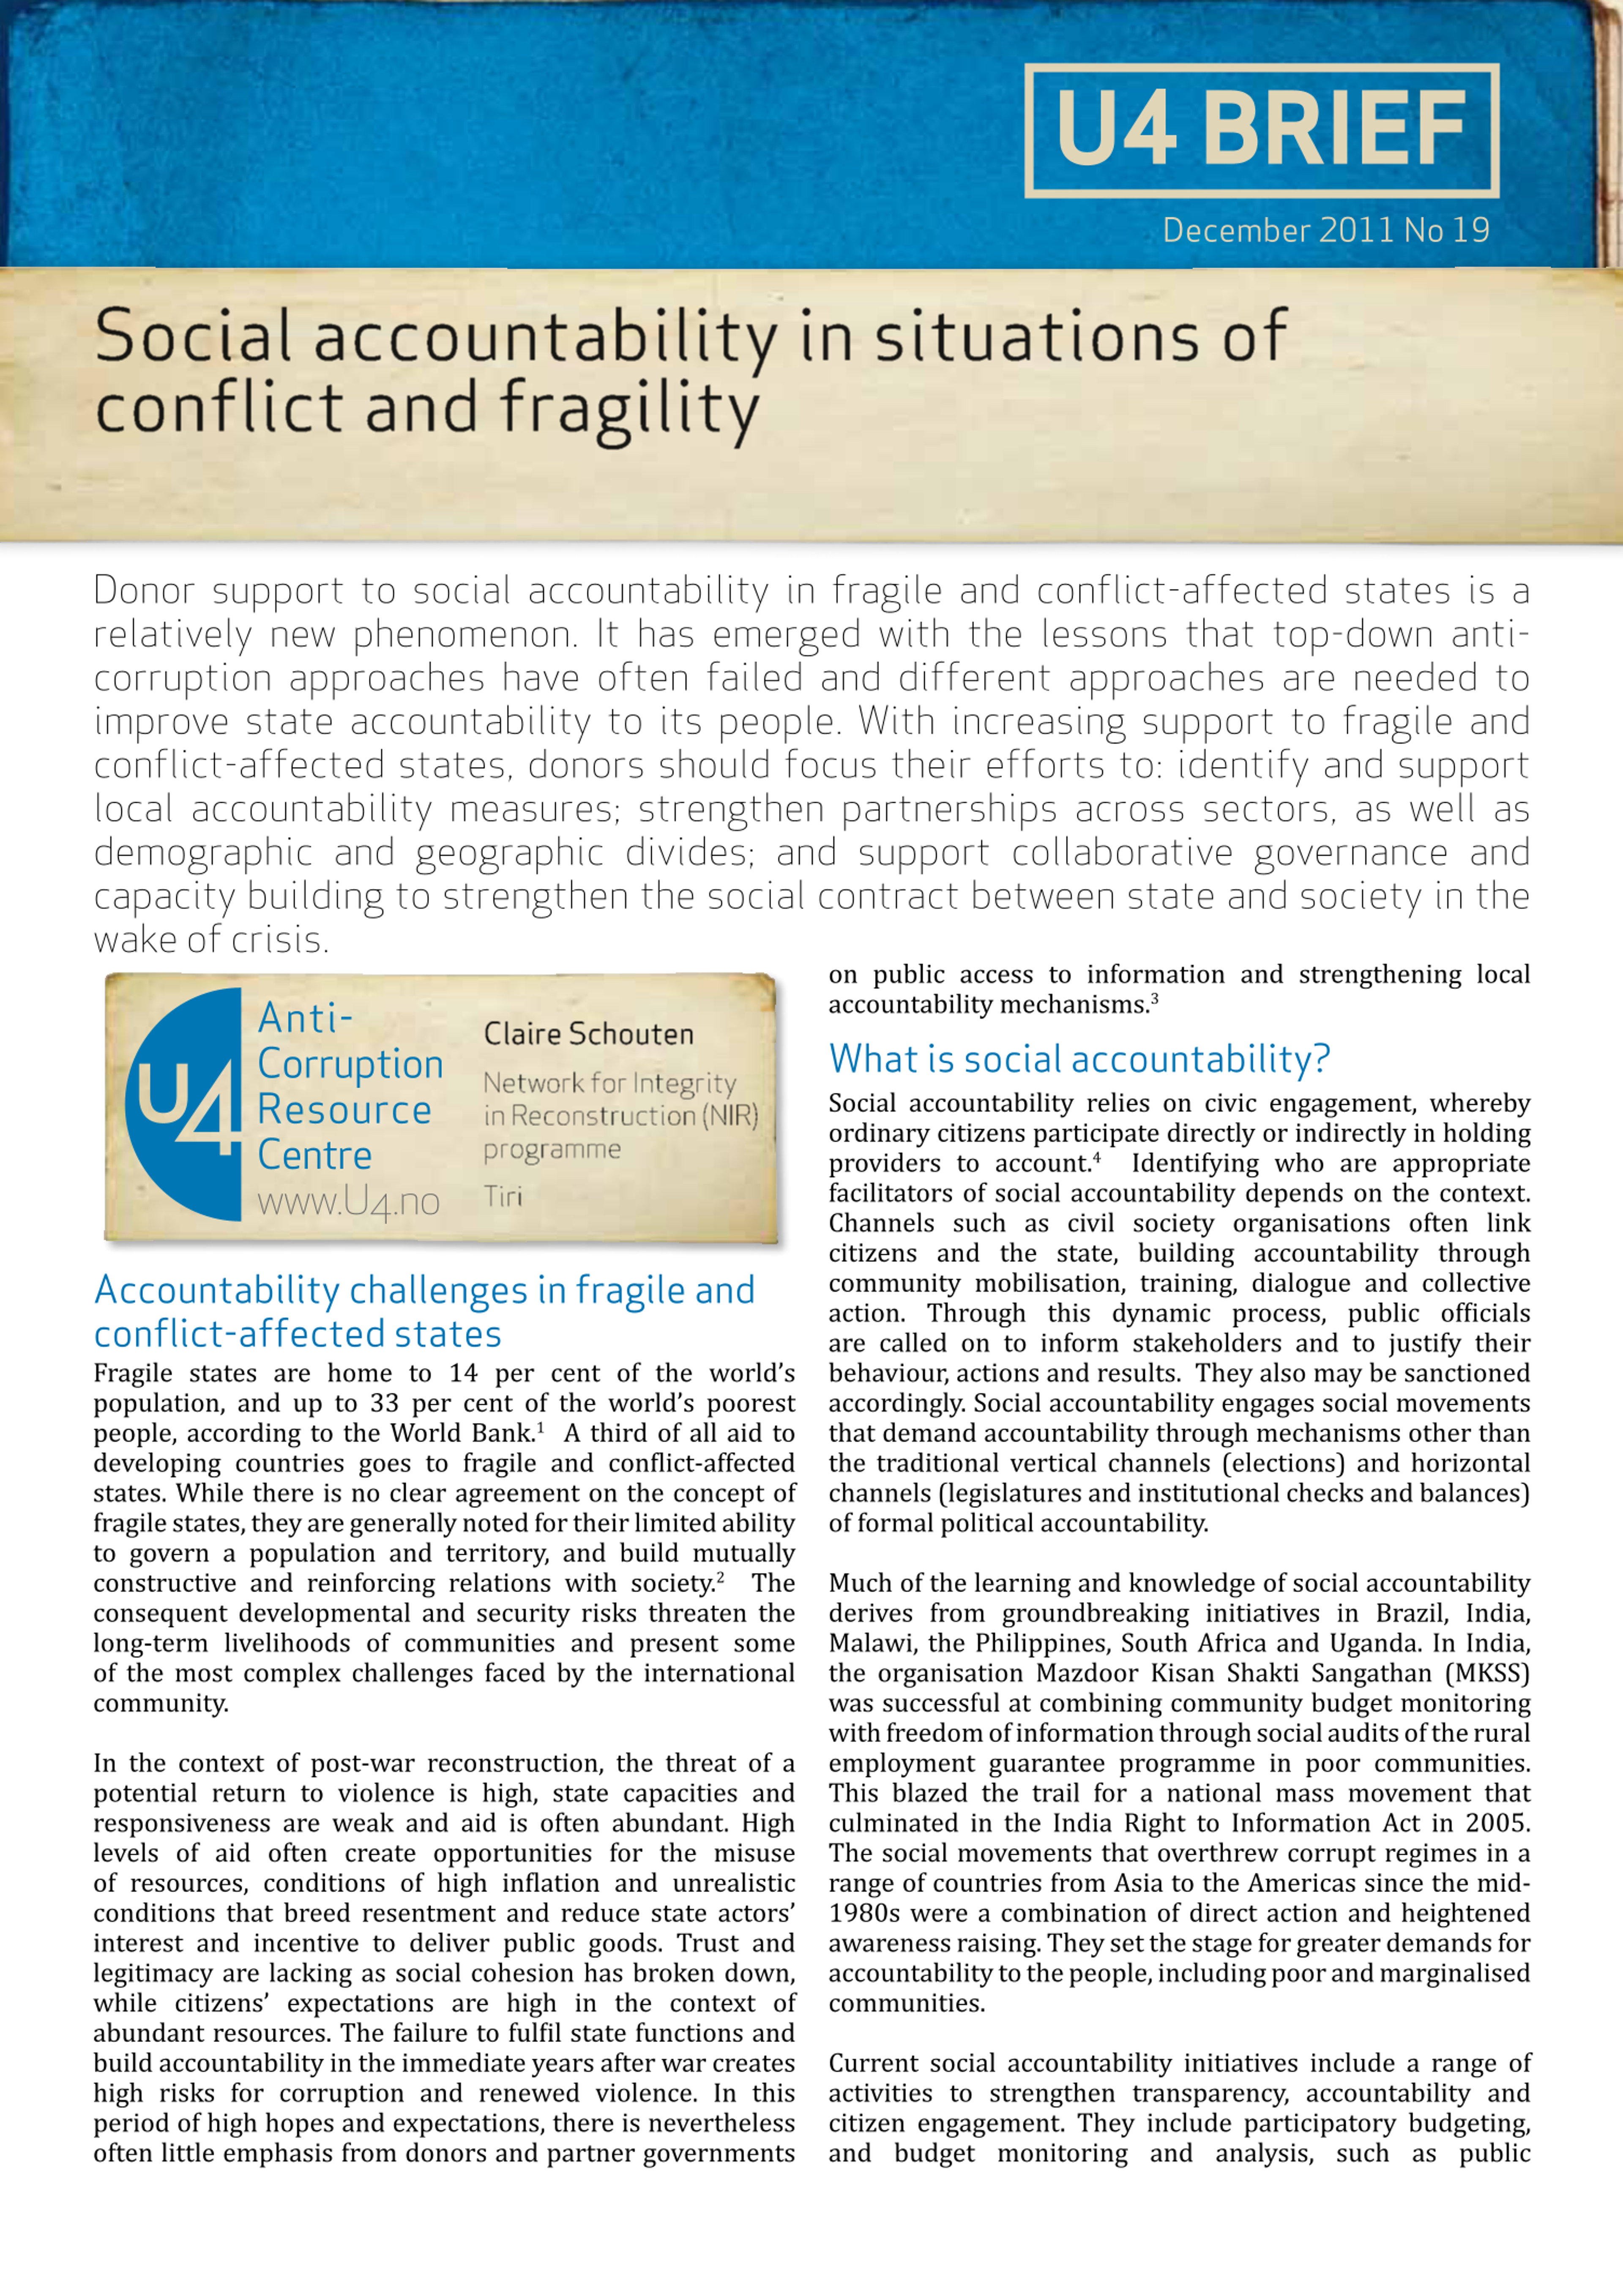 Social accountability in situations of conflict and fragility